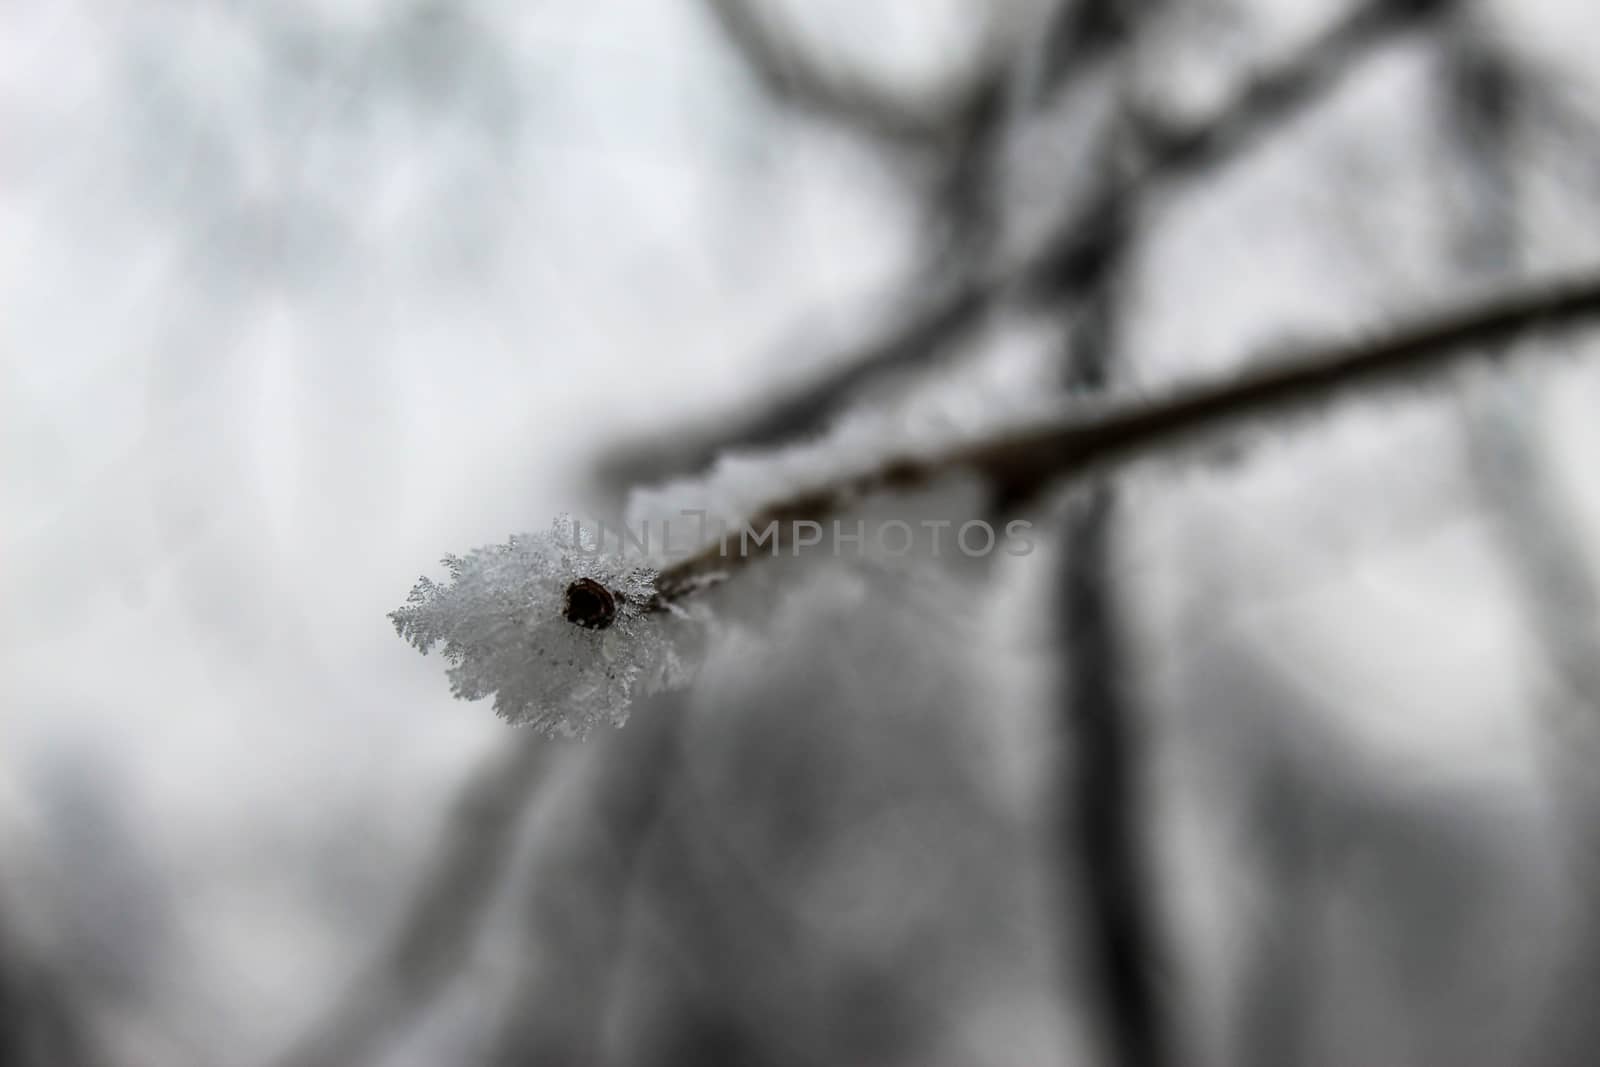 Hoarfrost on a twig on a tree in winter. Very cold. Sarajevo, Bosnia and Herzegovina.